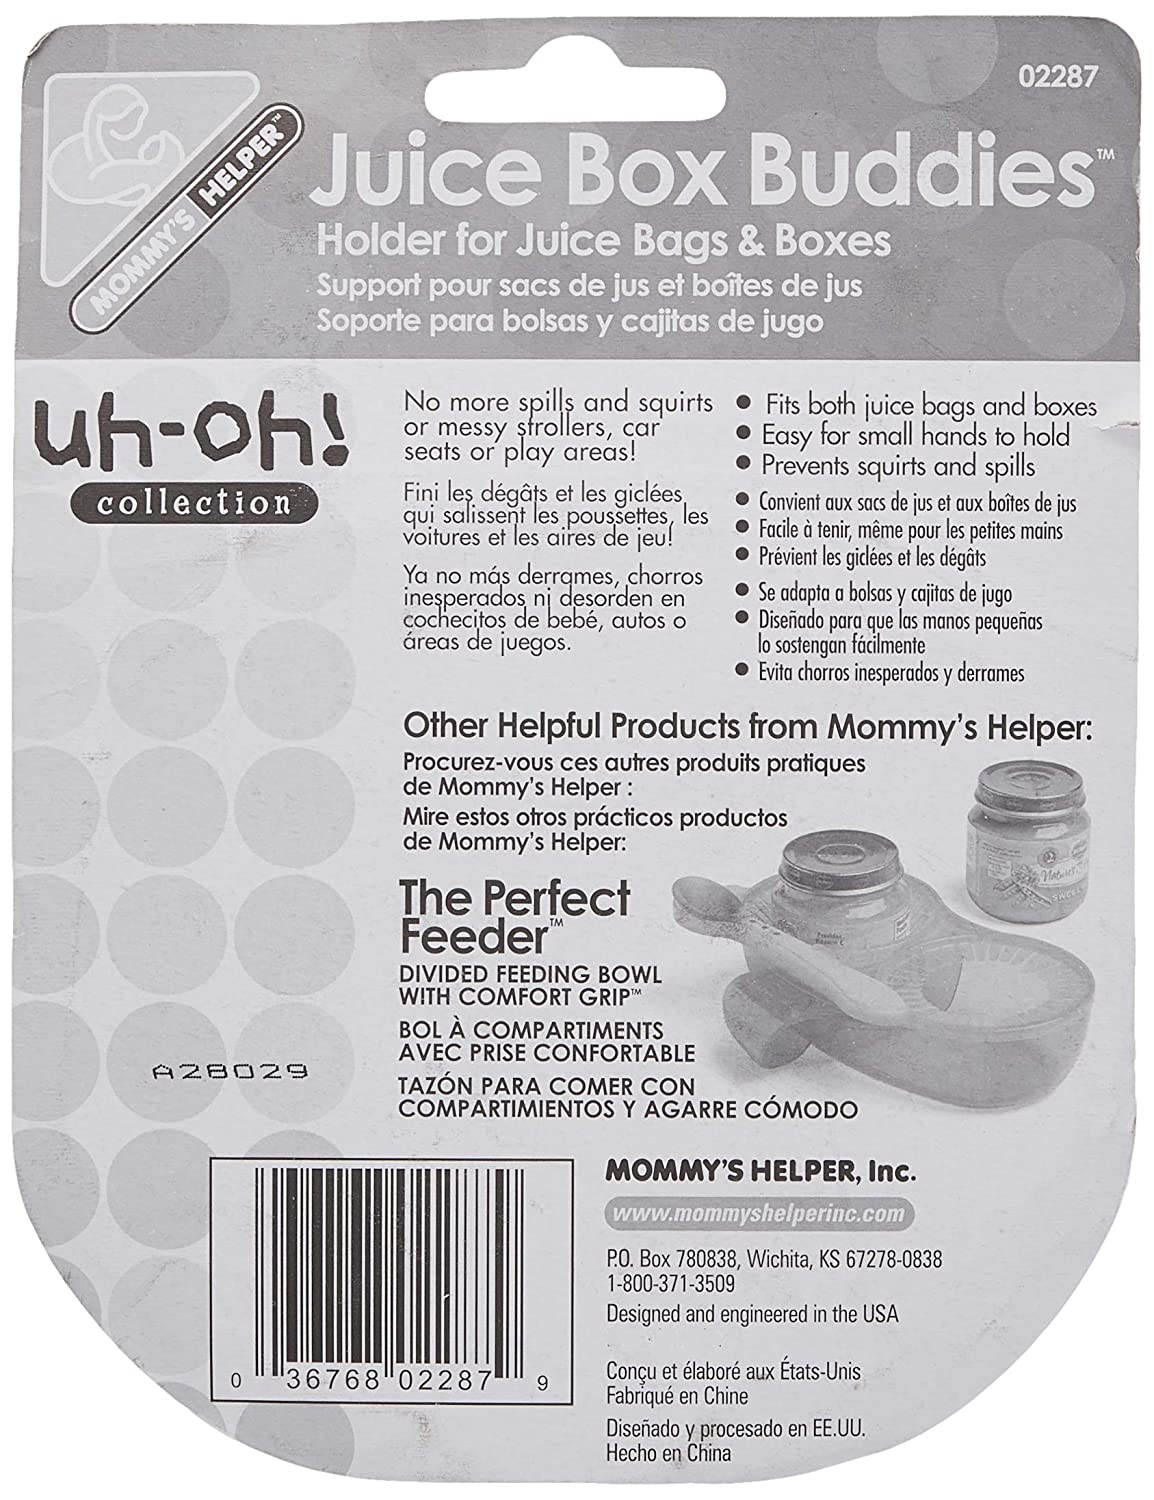 Mommys Helper Juice Box Buddies Holder for Juice Bags and Boxes